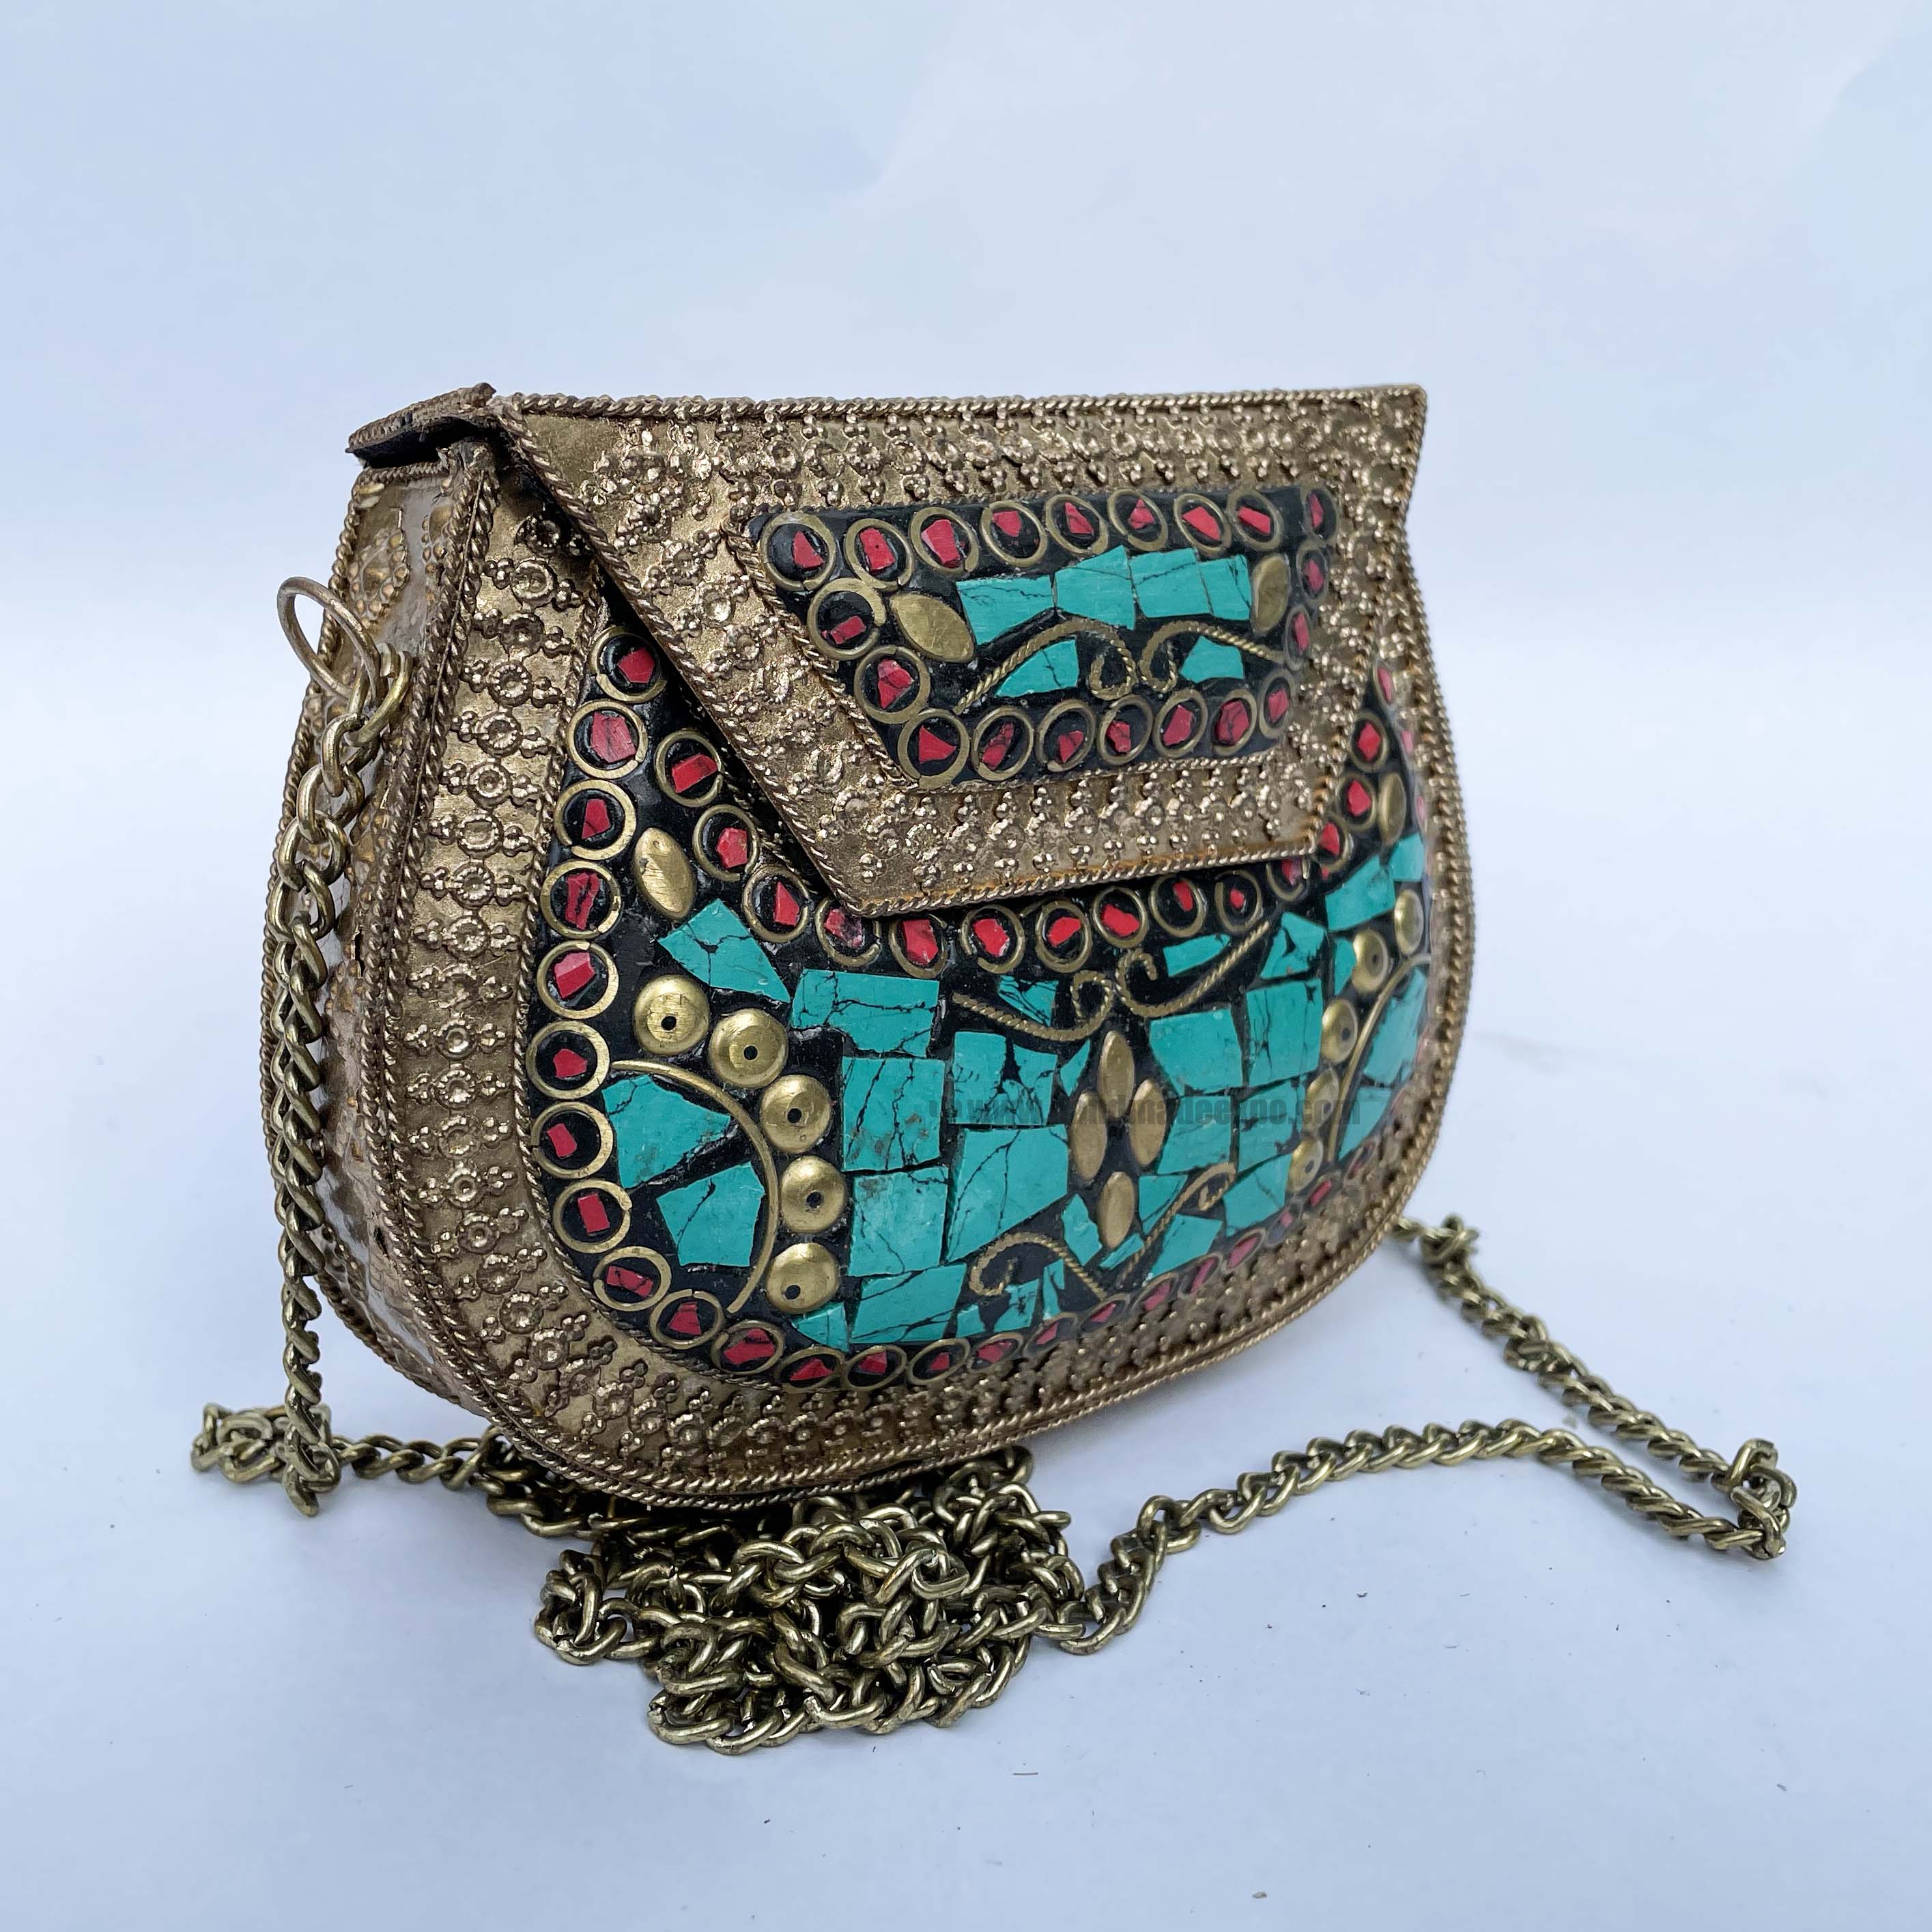 Nepali Handmade Small Ladies Bag With stone Setting, metal, silver, Red And Blue Colo